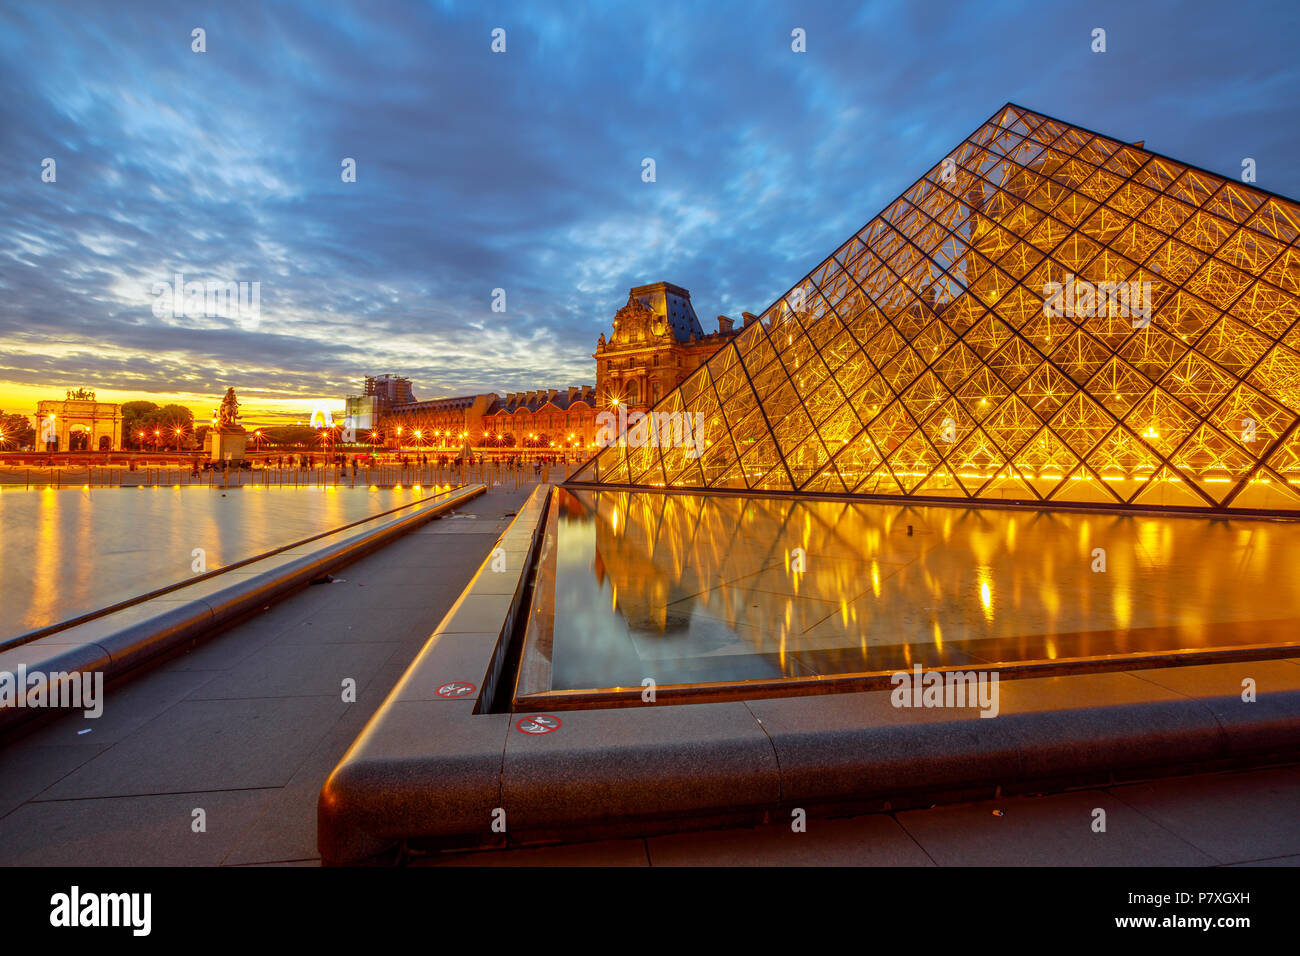 Paris, France - July 1, 2017: wide angle view of glass Pyramid and Pavillon Rishelieu reflecting at twilight. Cour Napoleon at blue hour. Cultural art picture gallery hosting Gioconda of Leonardo. Stock Photo